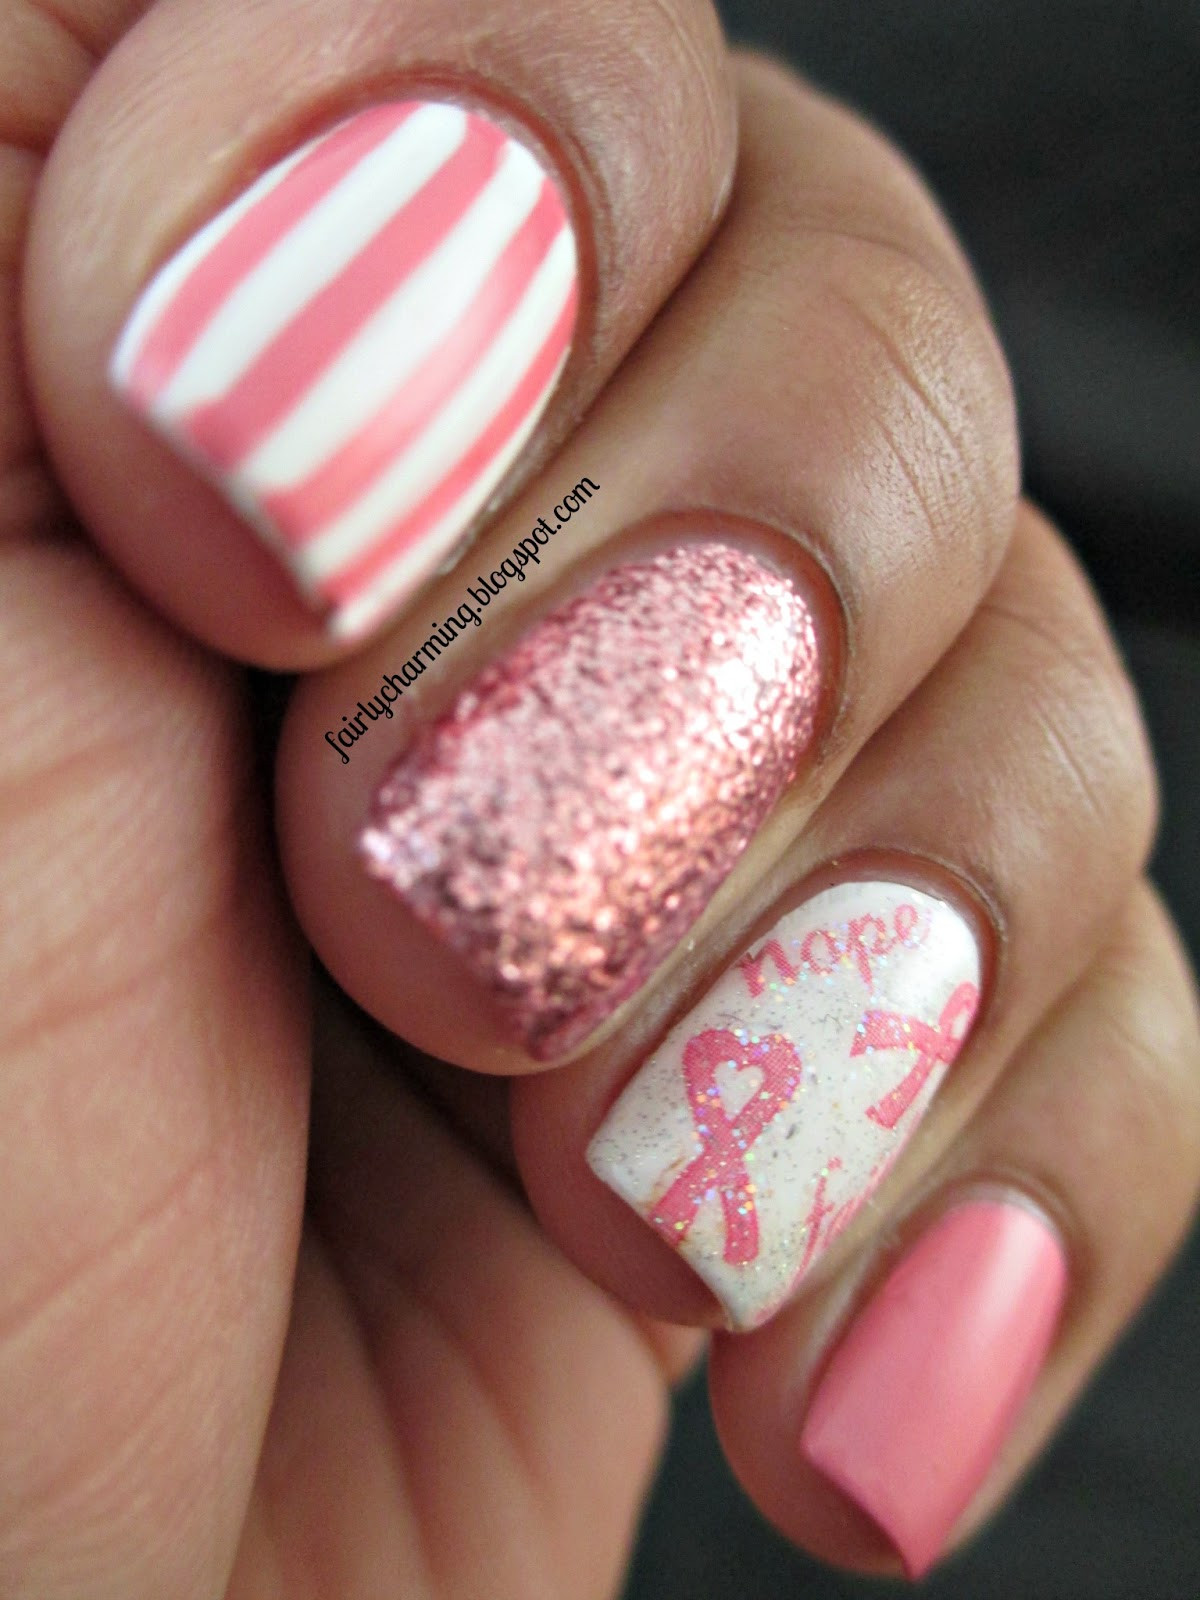 Breast Cancer Nail Art
 Fairly Charming Joby Nail Art s Fight Against Breast Cancer